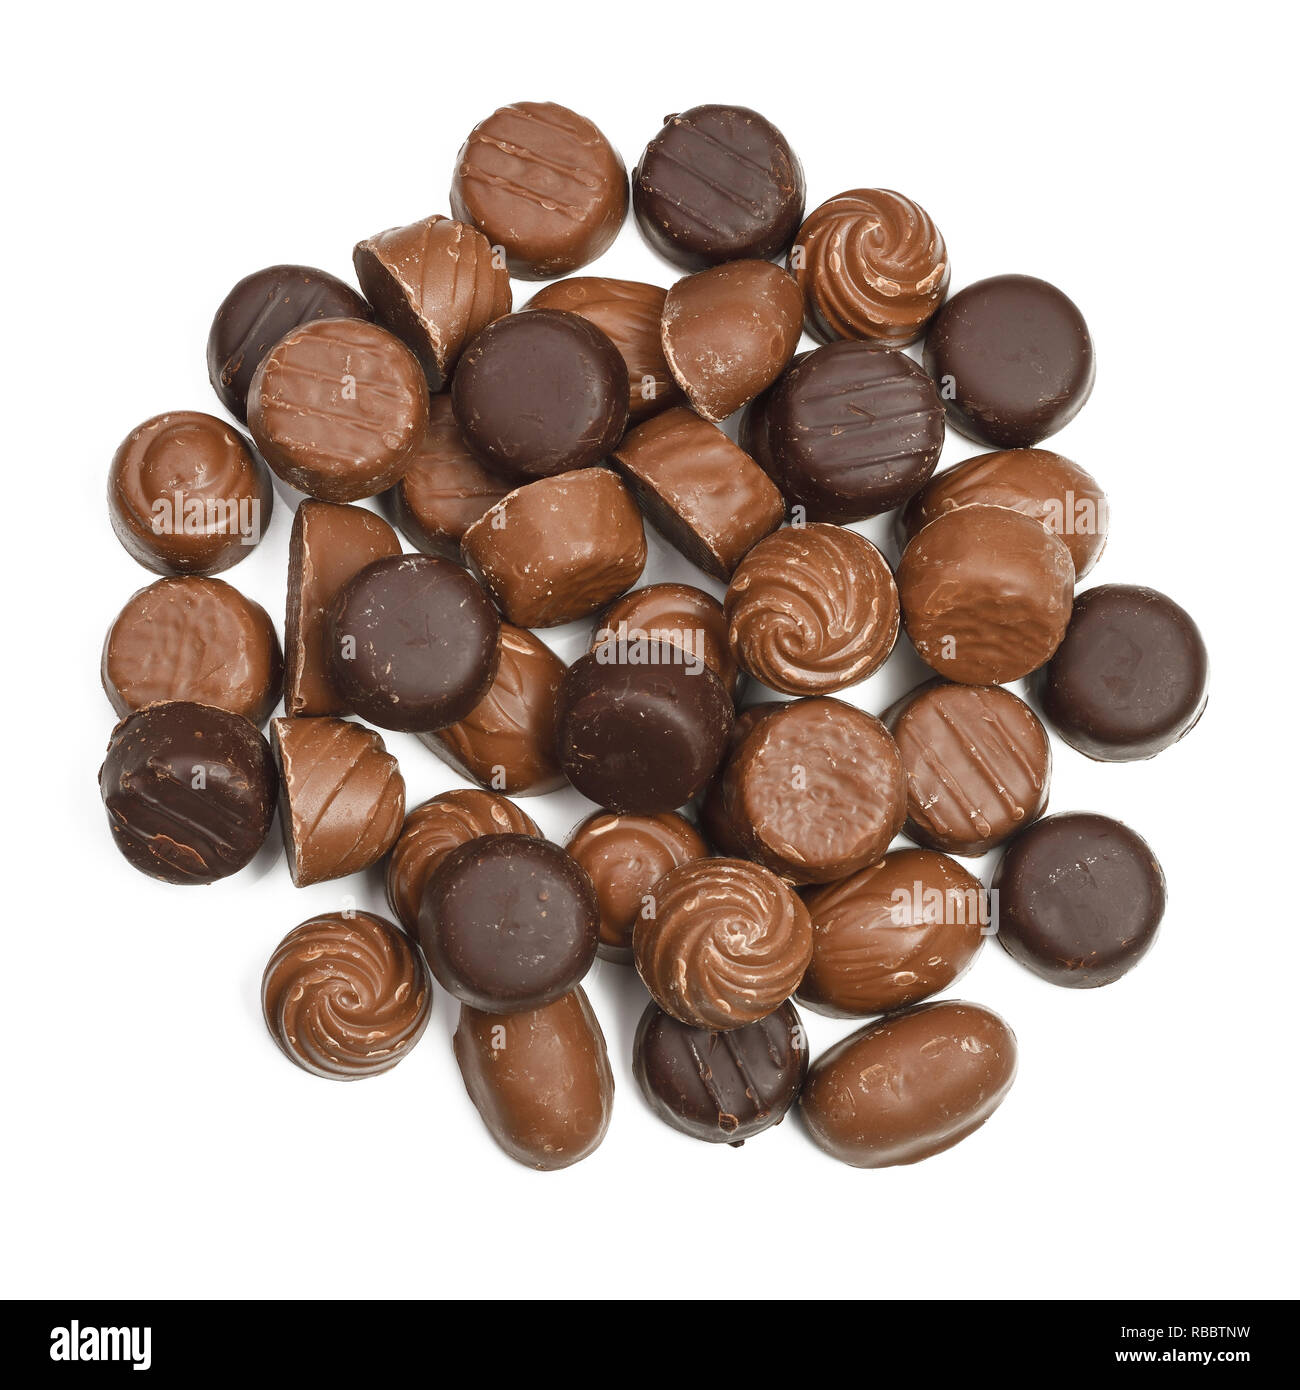 Looking down on a pile of unwrapped chocolate sweets Stock Photo